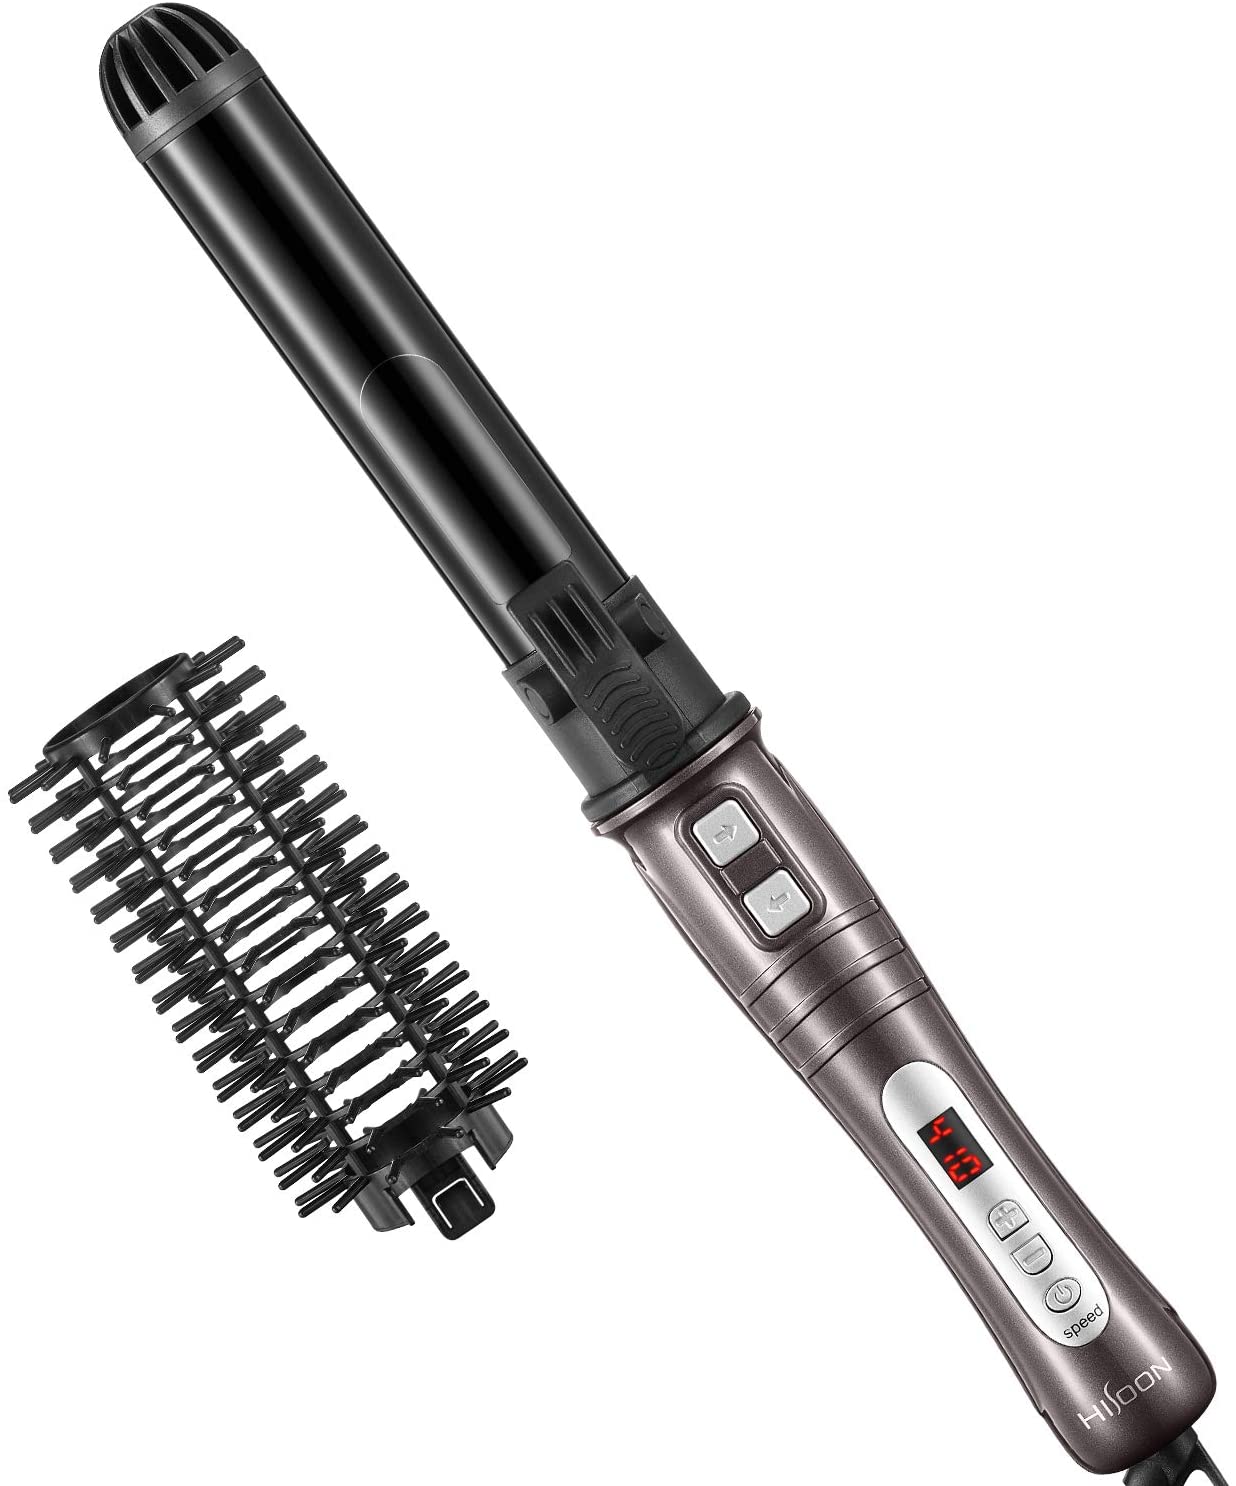 automatic curling iron